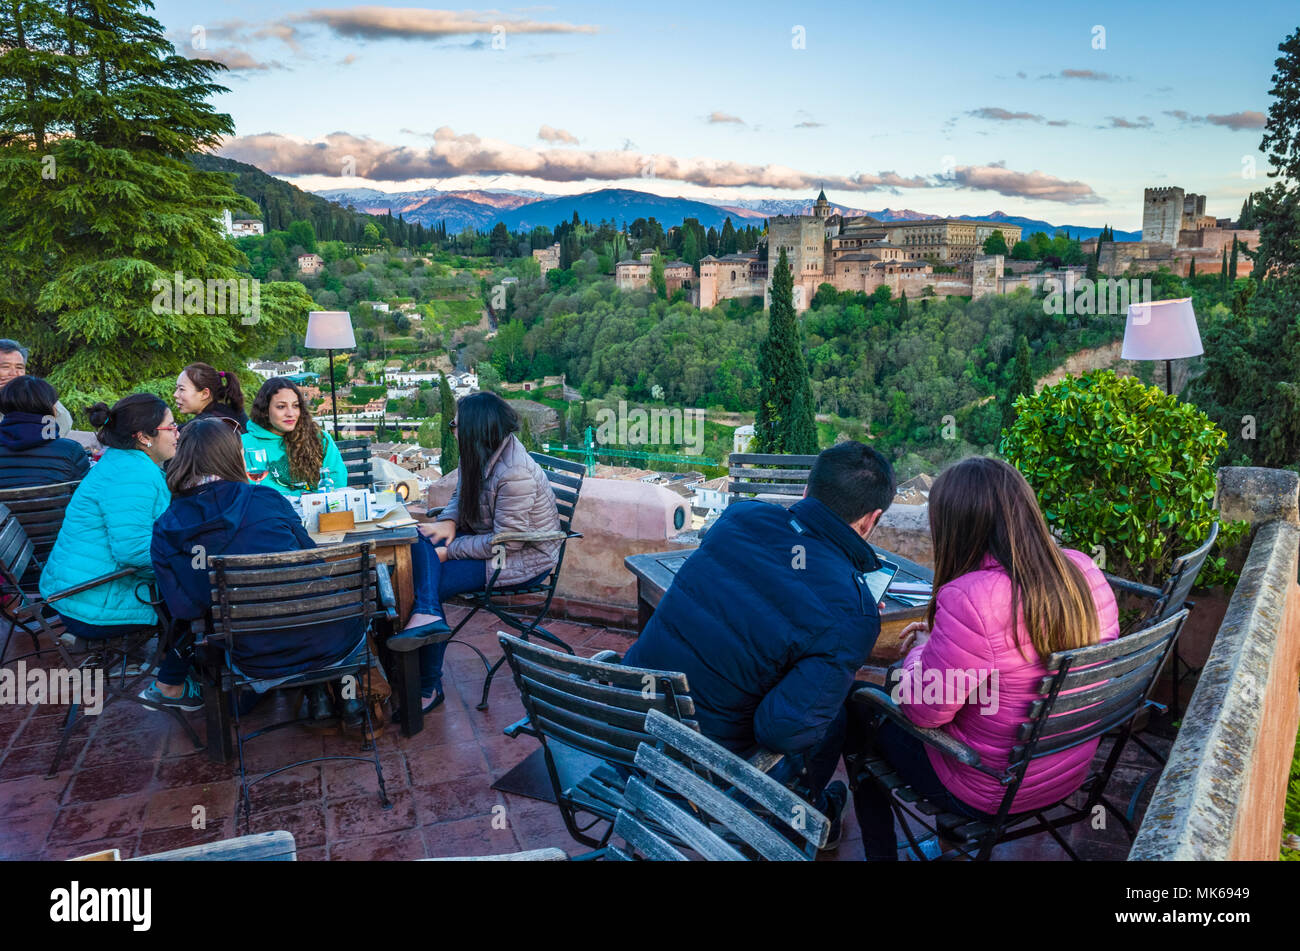 Granada, Andalusia, Spain - April 29th, 2018 : Tourists at Huerto de Juan Ranas cafe and restaurant in the Albaicin district old town, enjoy a panoram Stock Photo